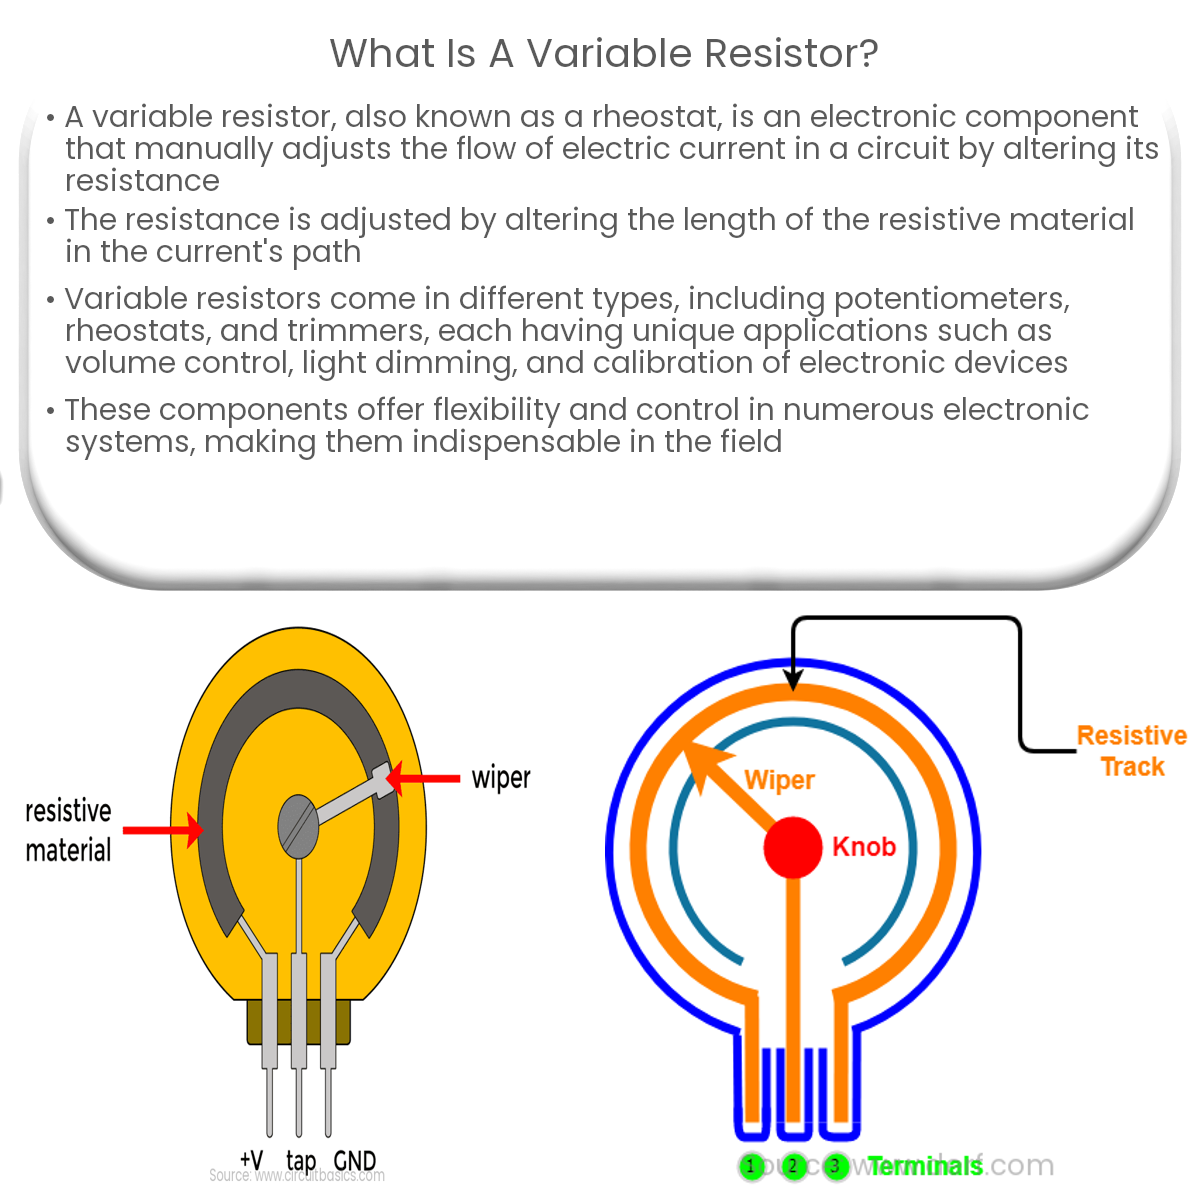 What is a variable resistor?